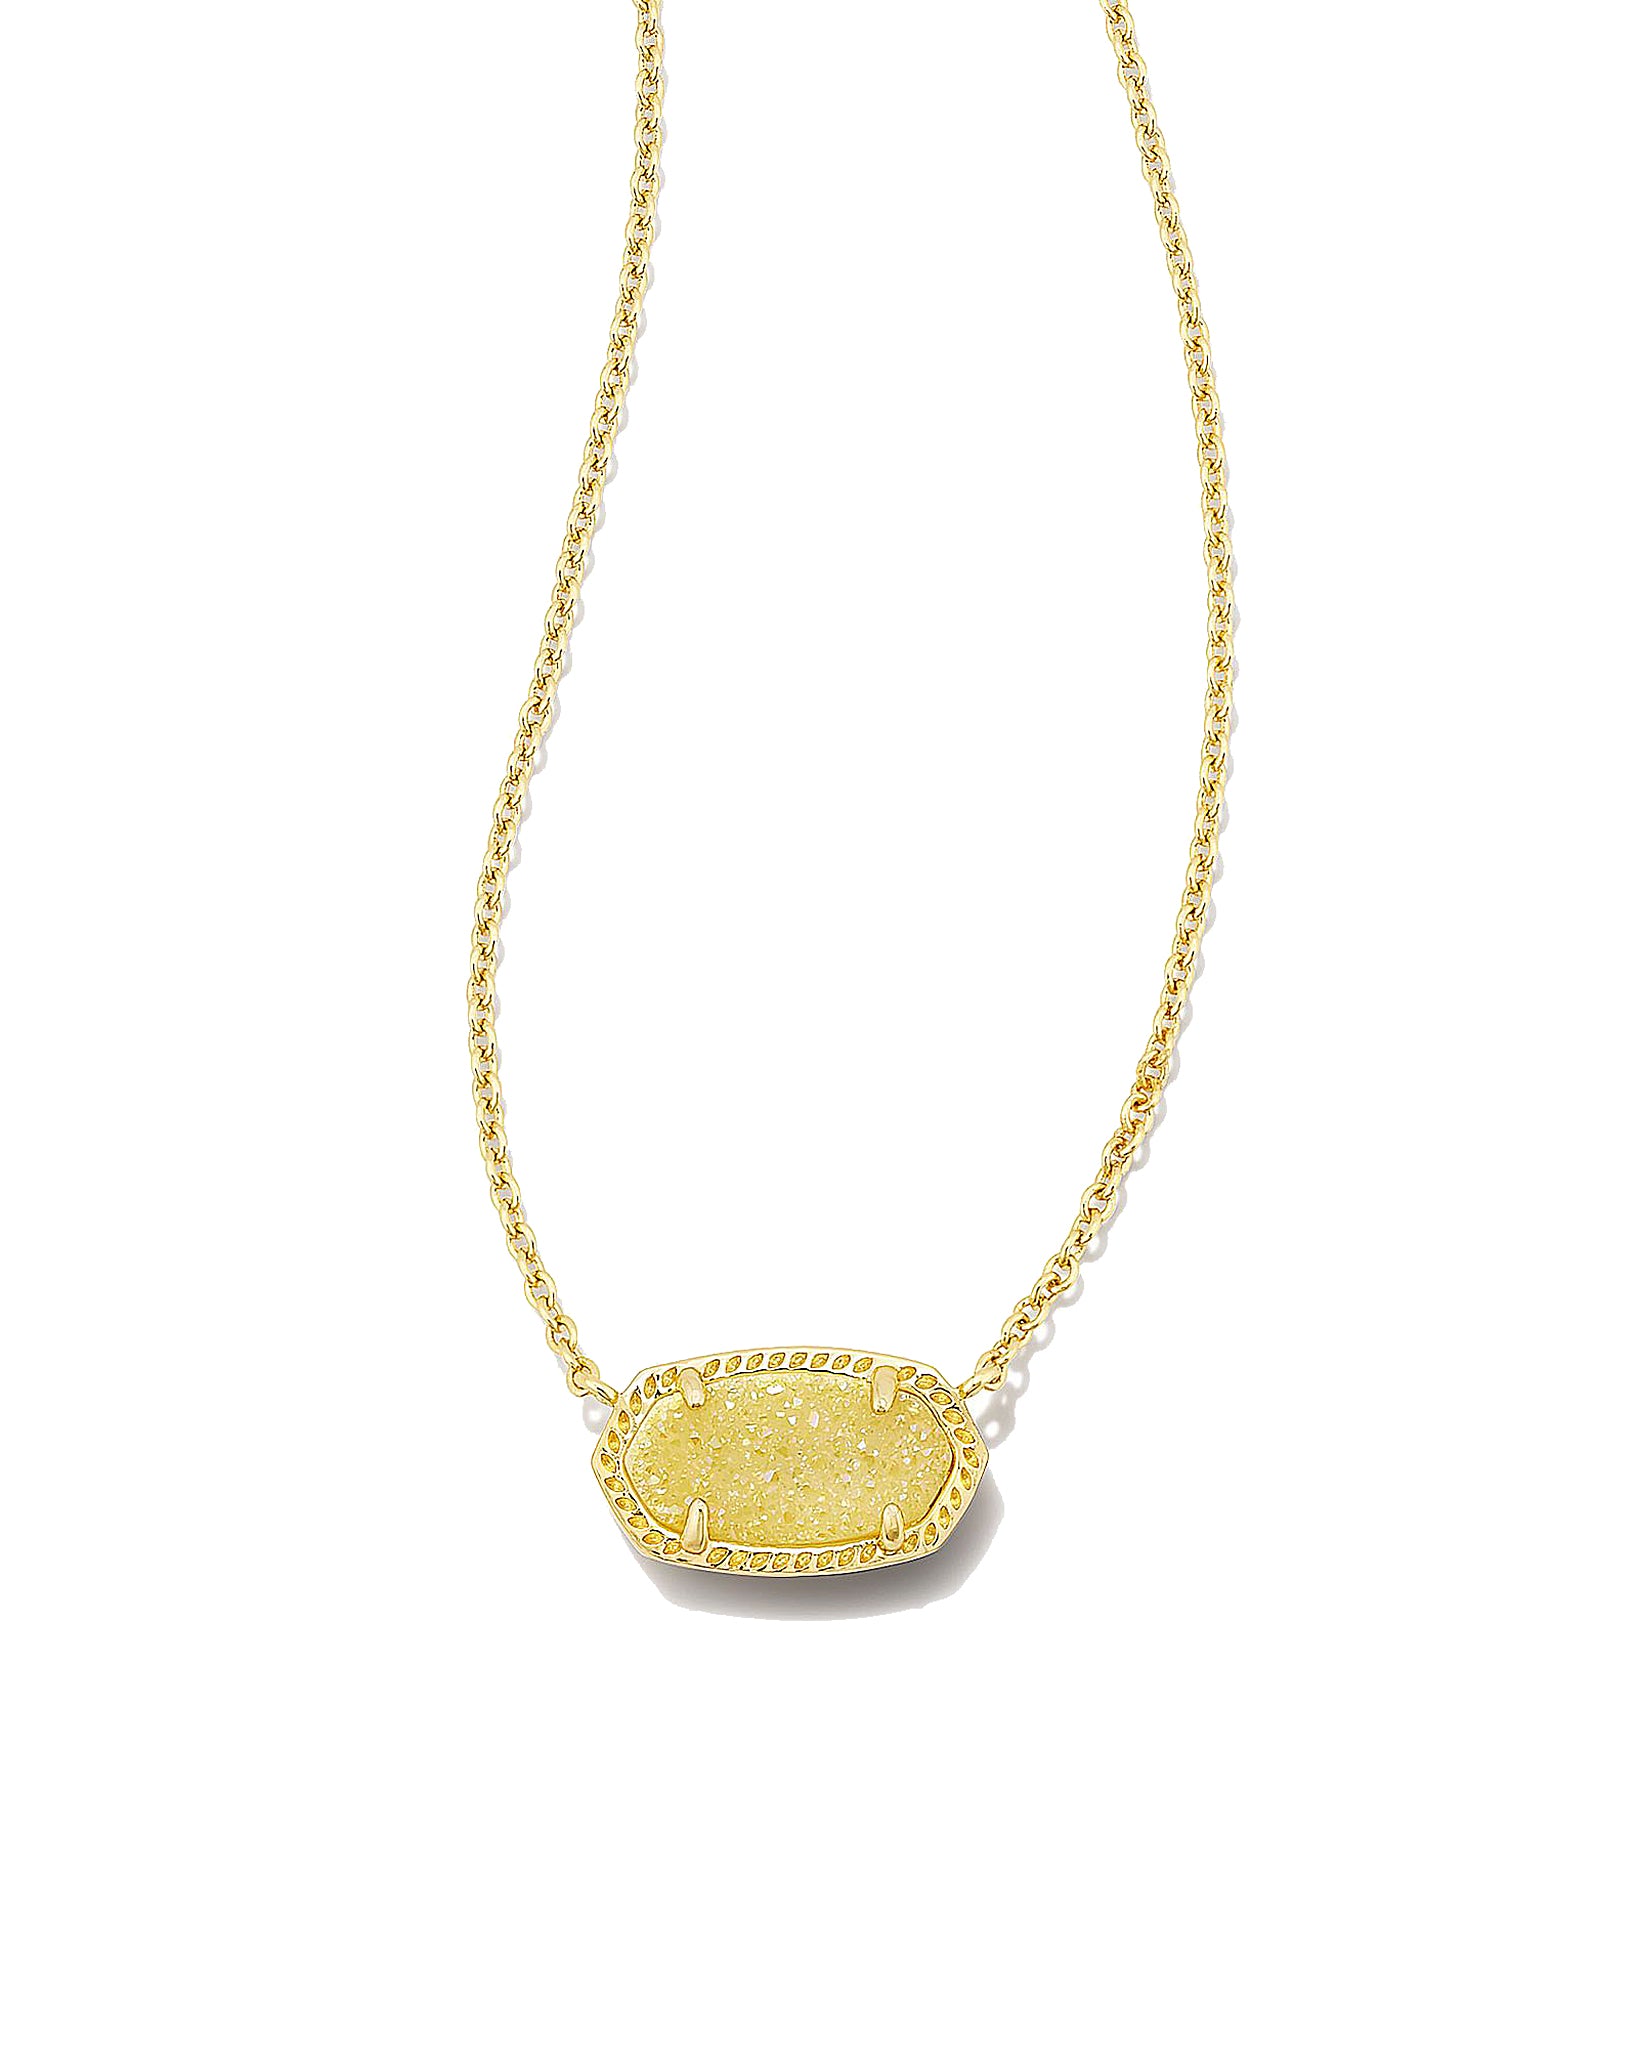 Kendra Scott Elisa Oval Pendant Necklace in Light Yellow Drusy and Gold